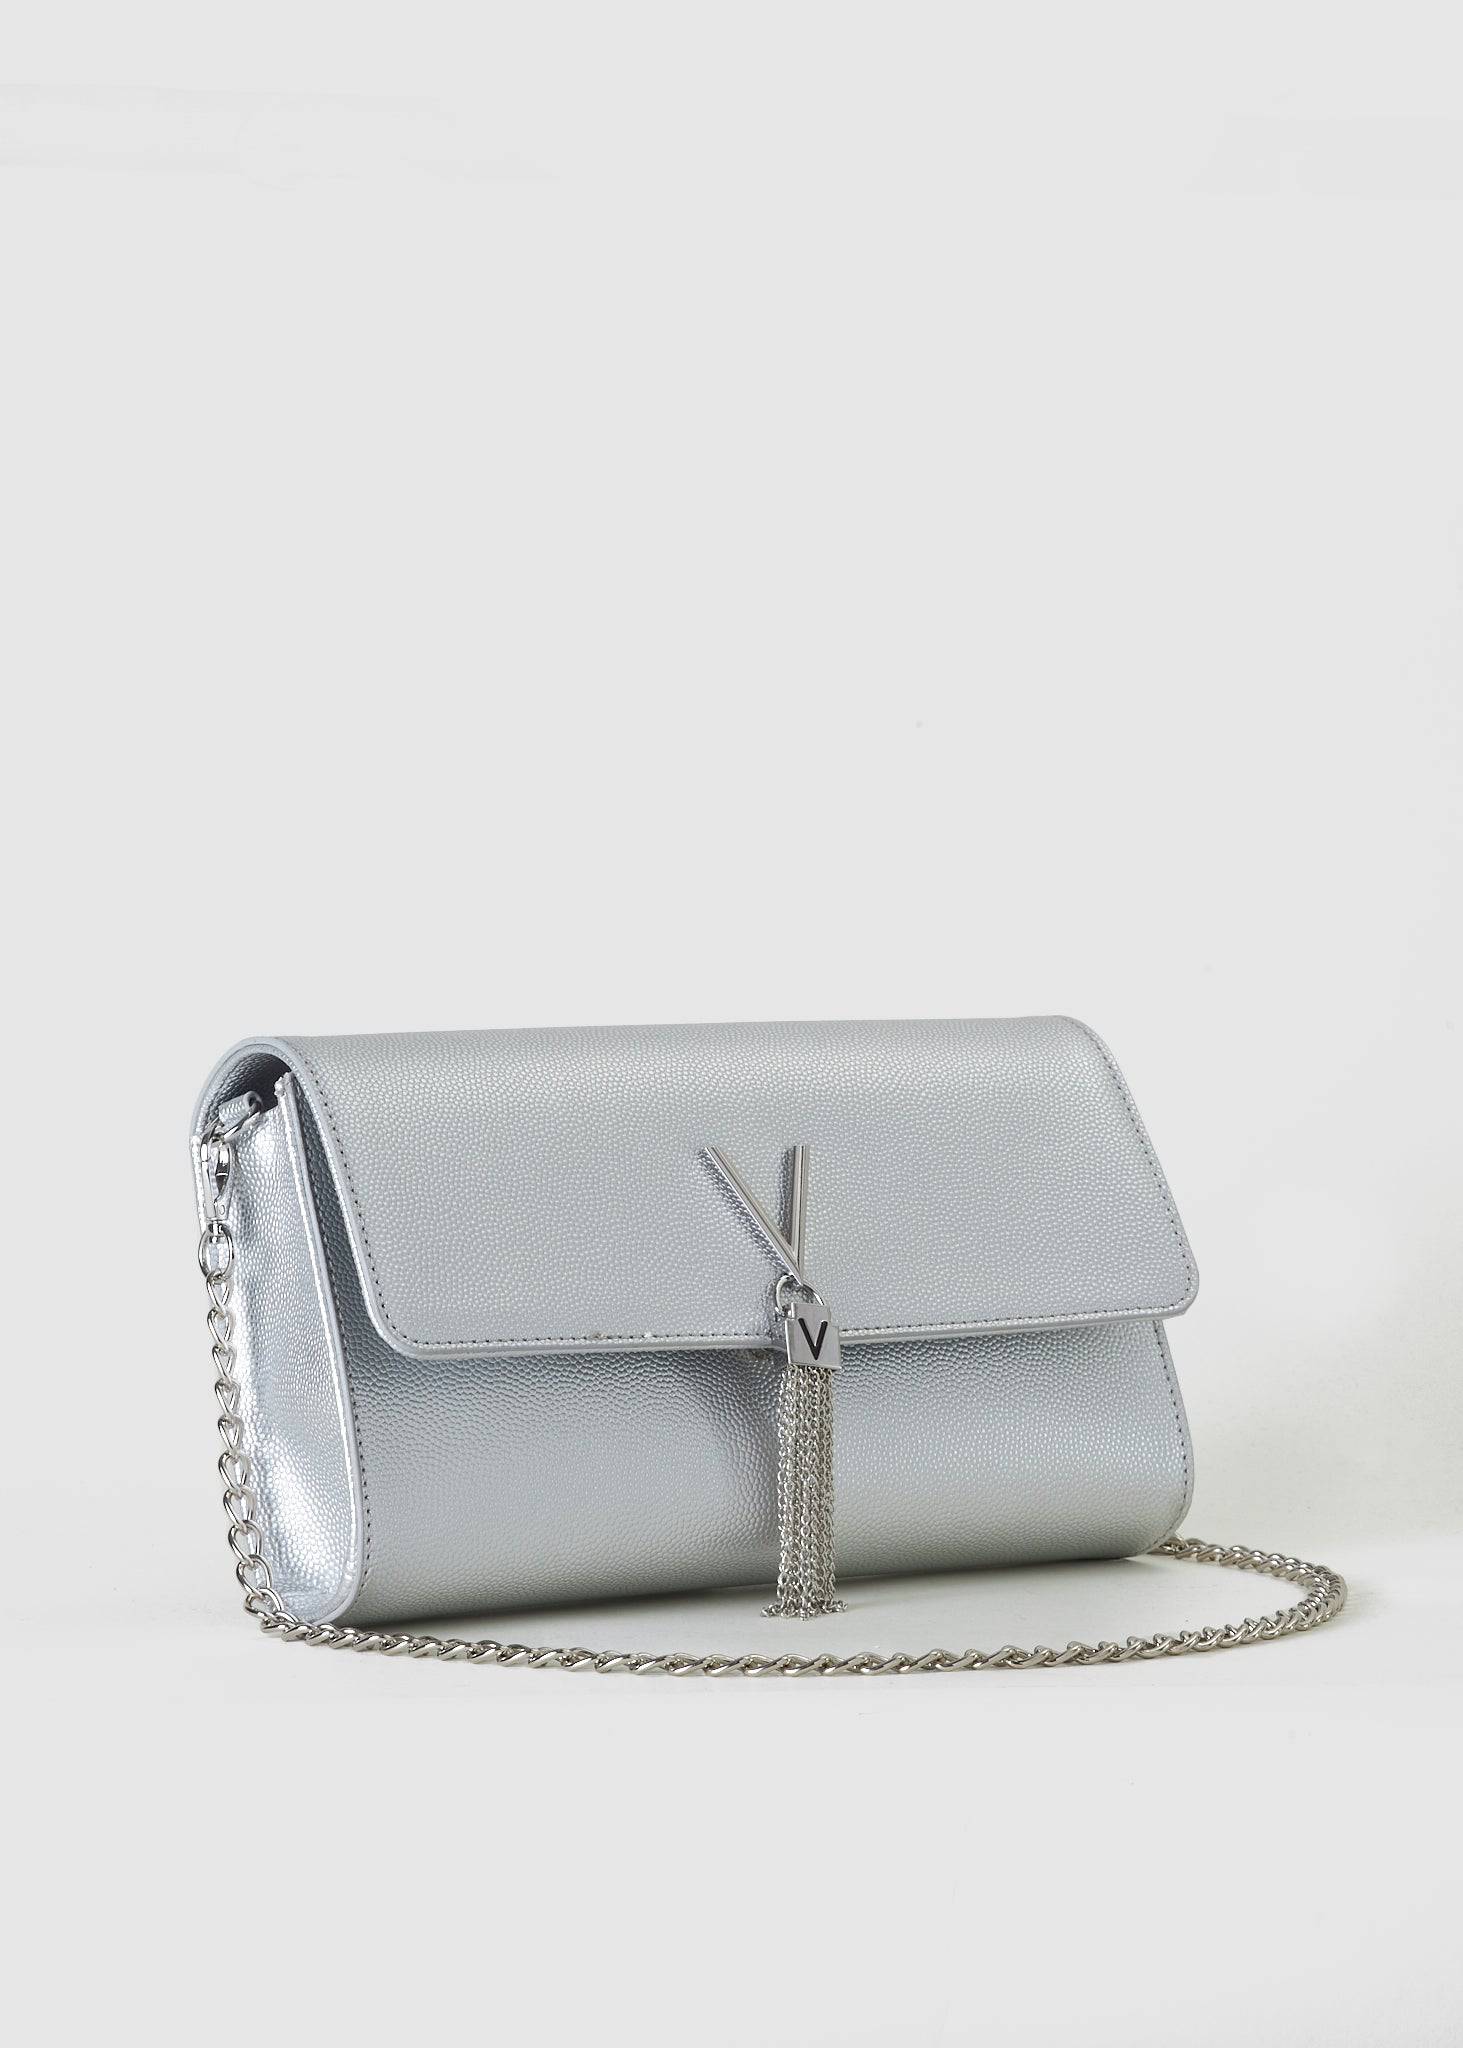 Valentino Bags Womens Divina Small Fold Over Clutch Bag With Chain